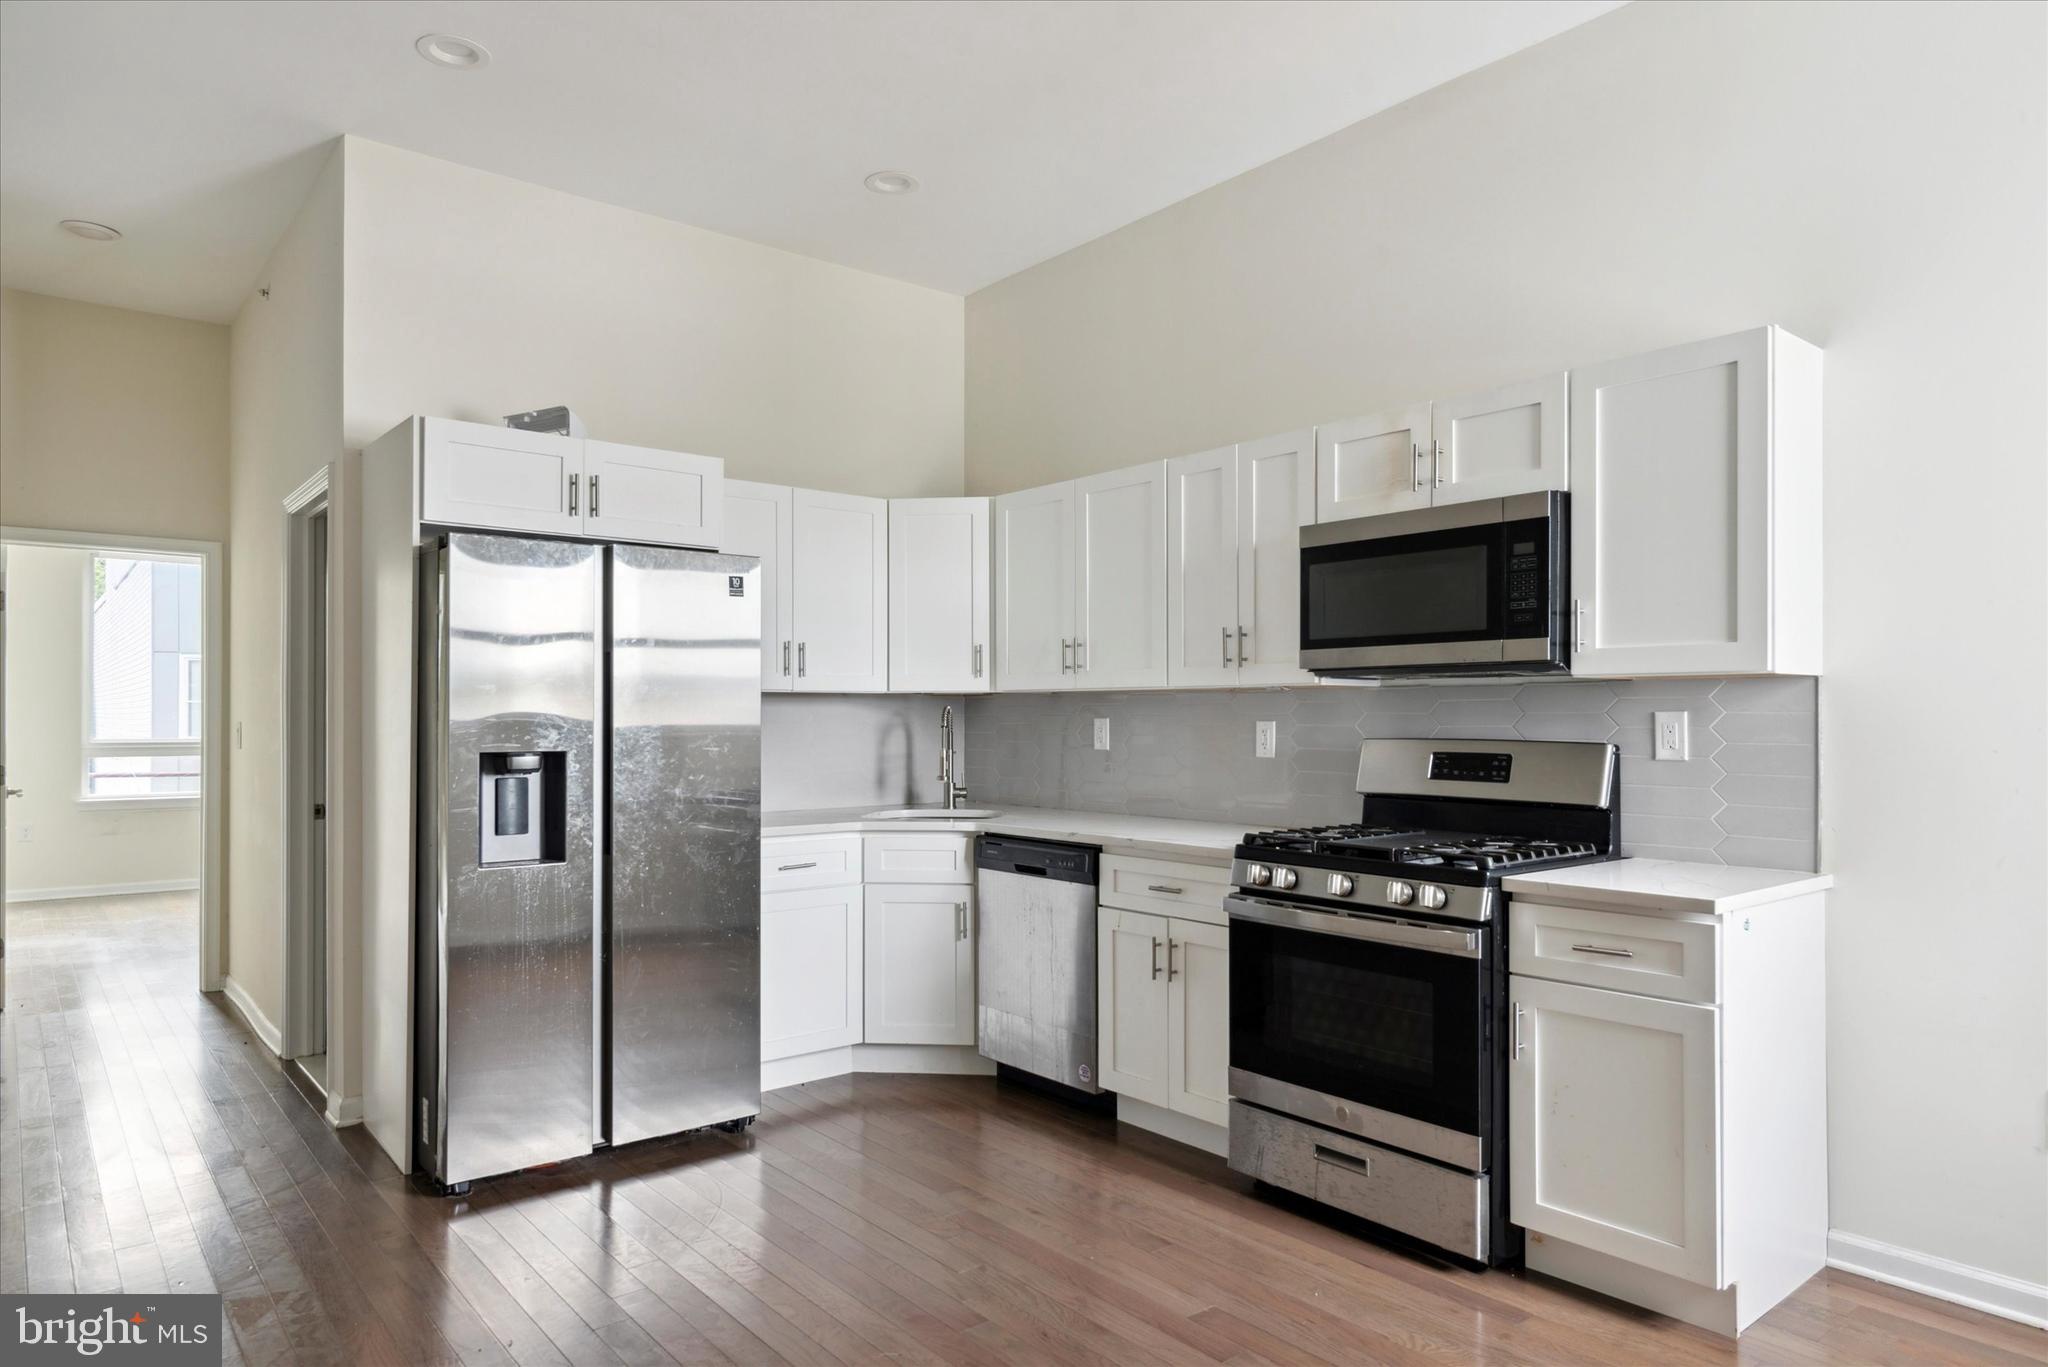 a kitchen with stainless steel appliances a refrigerator a stove top oven and sink